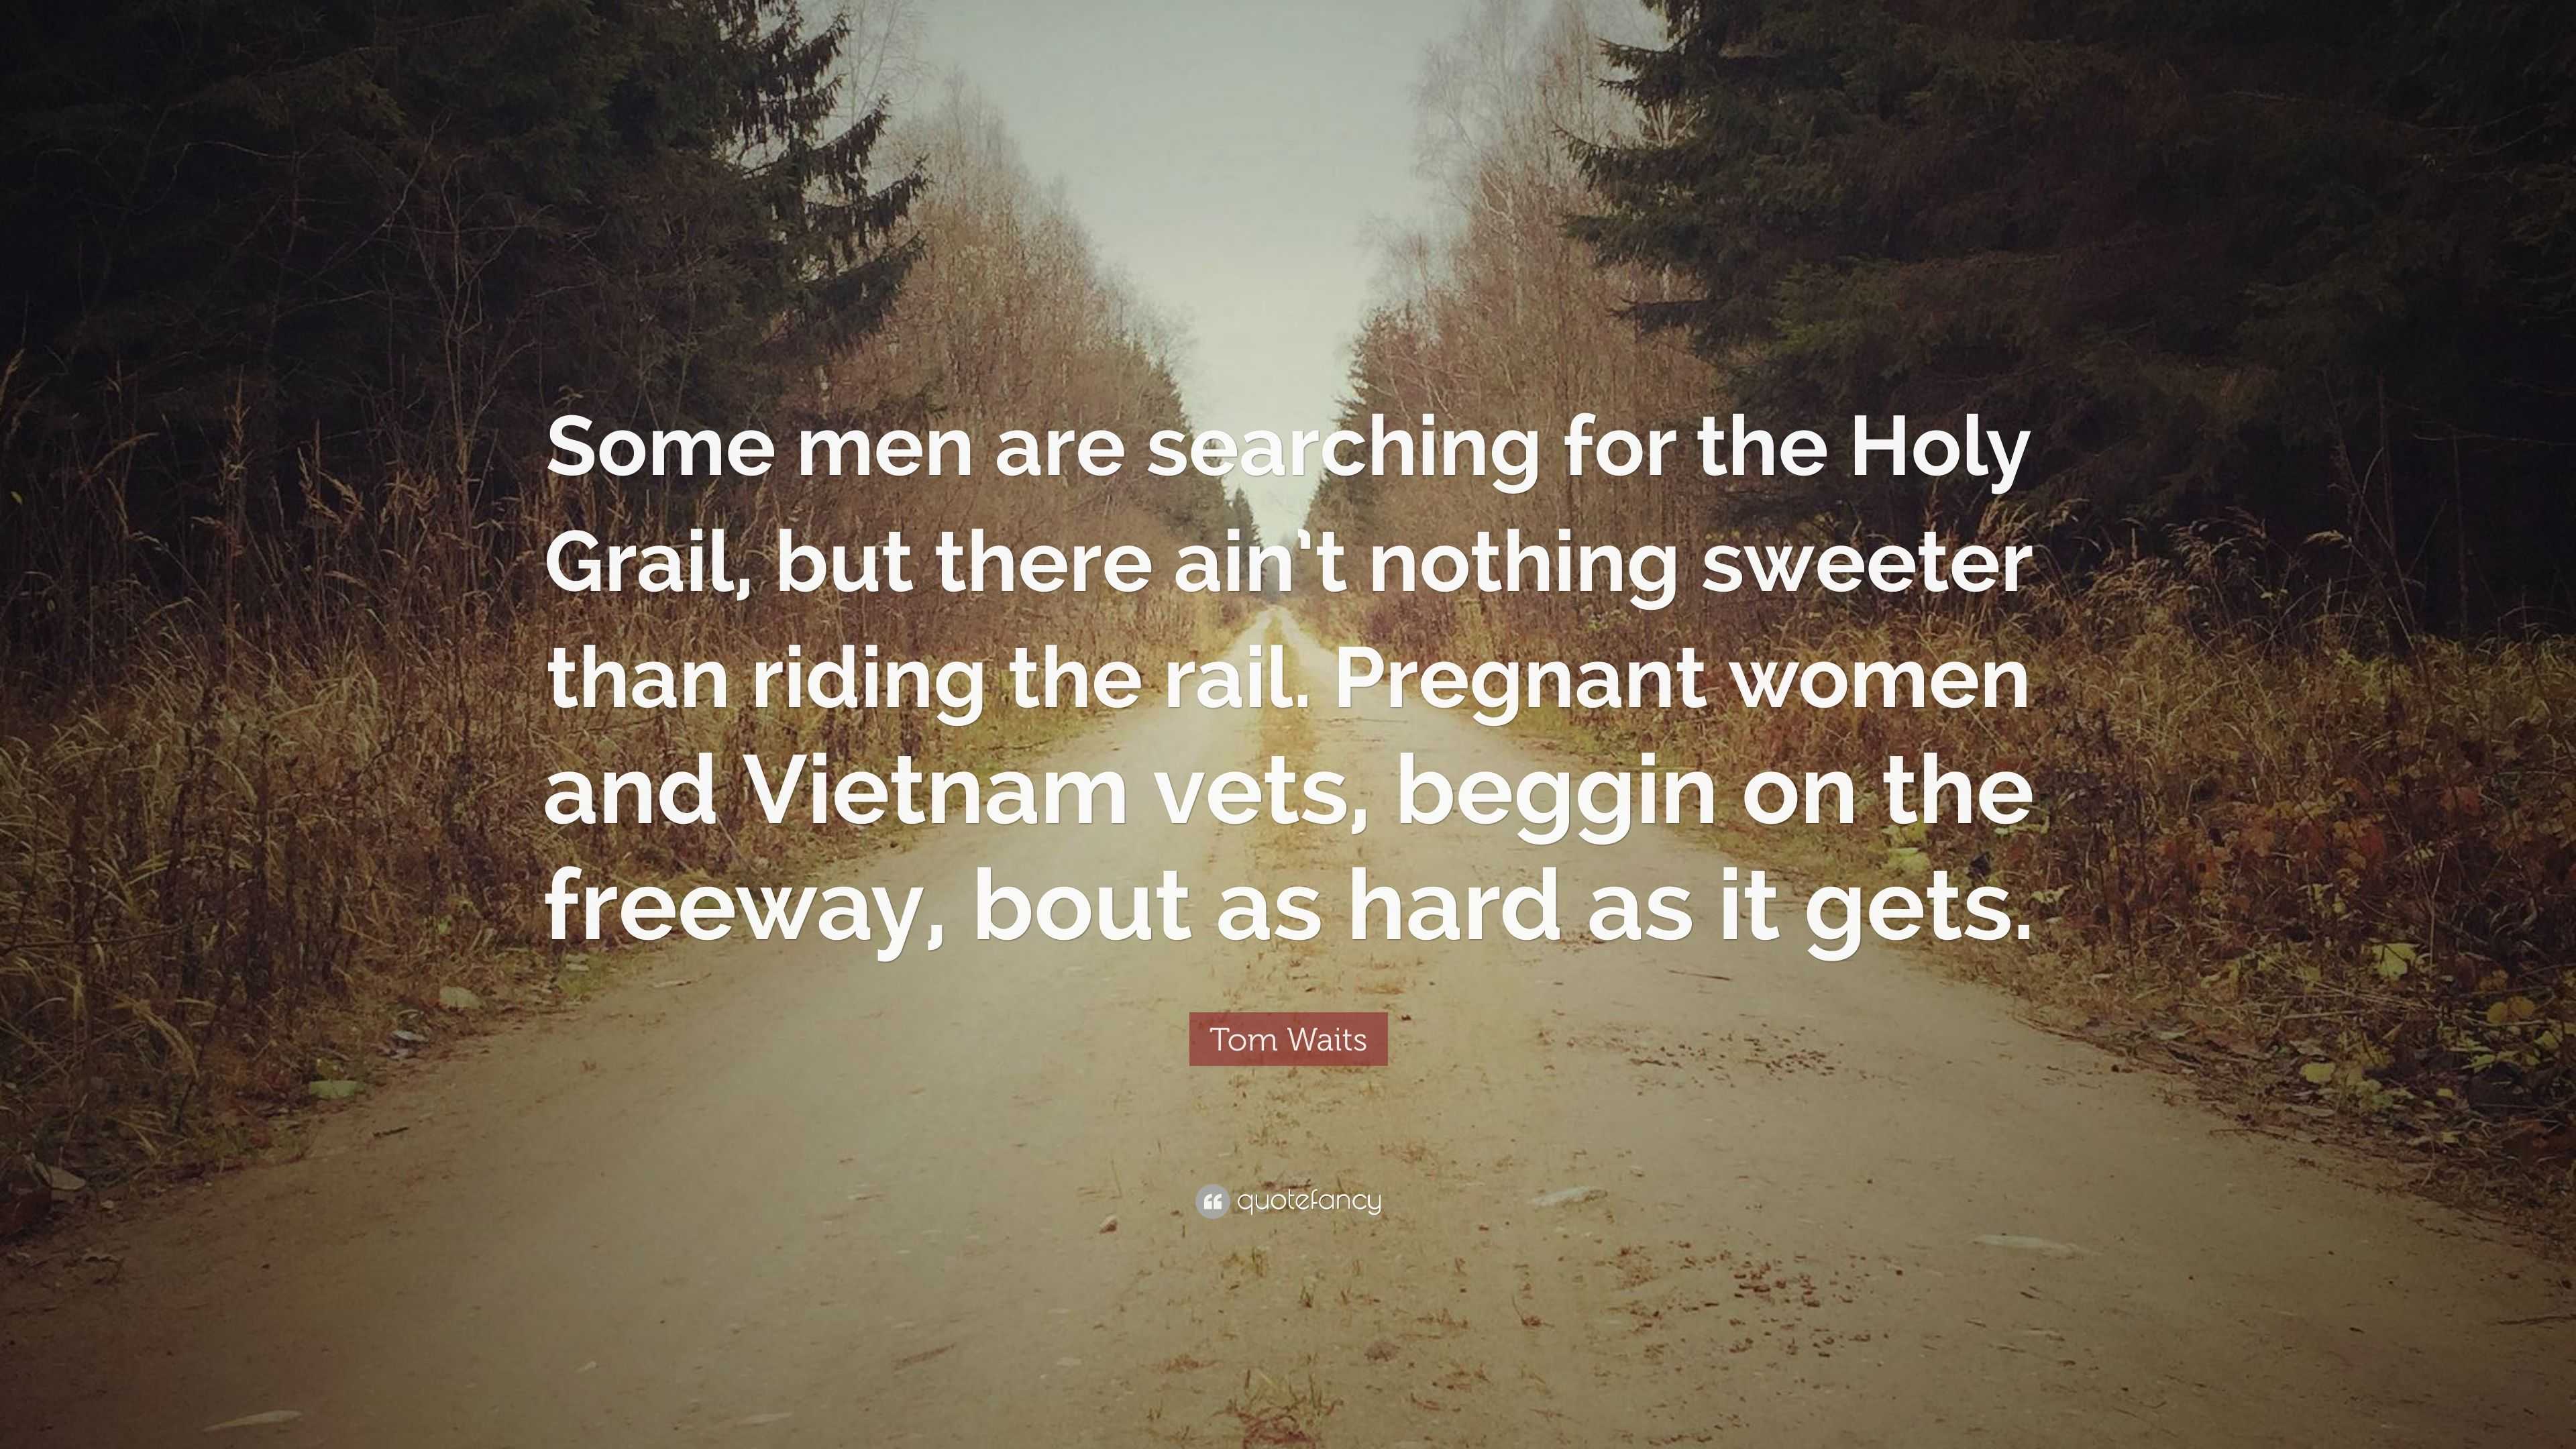 Tom Waits Quote: “Some men are searching for the Holy Grail, but there  ain't nothing sweeter than riding the rail. Pregnant women and Viet...”